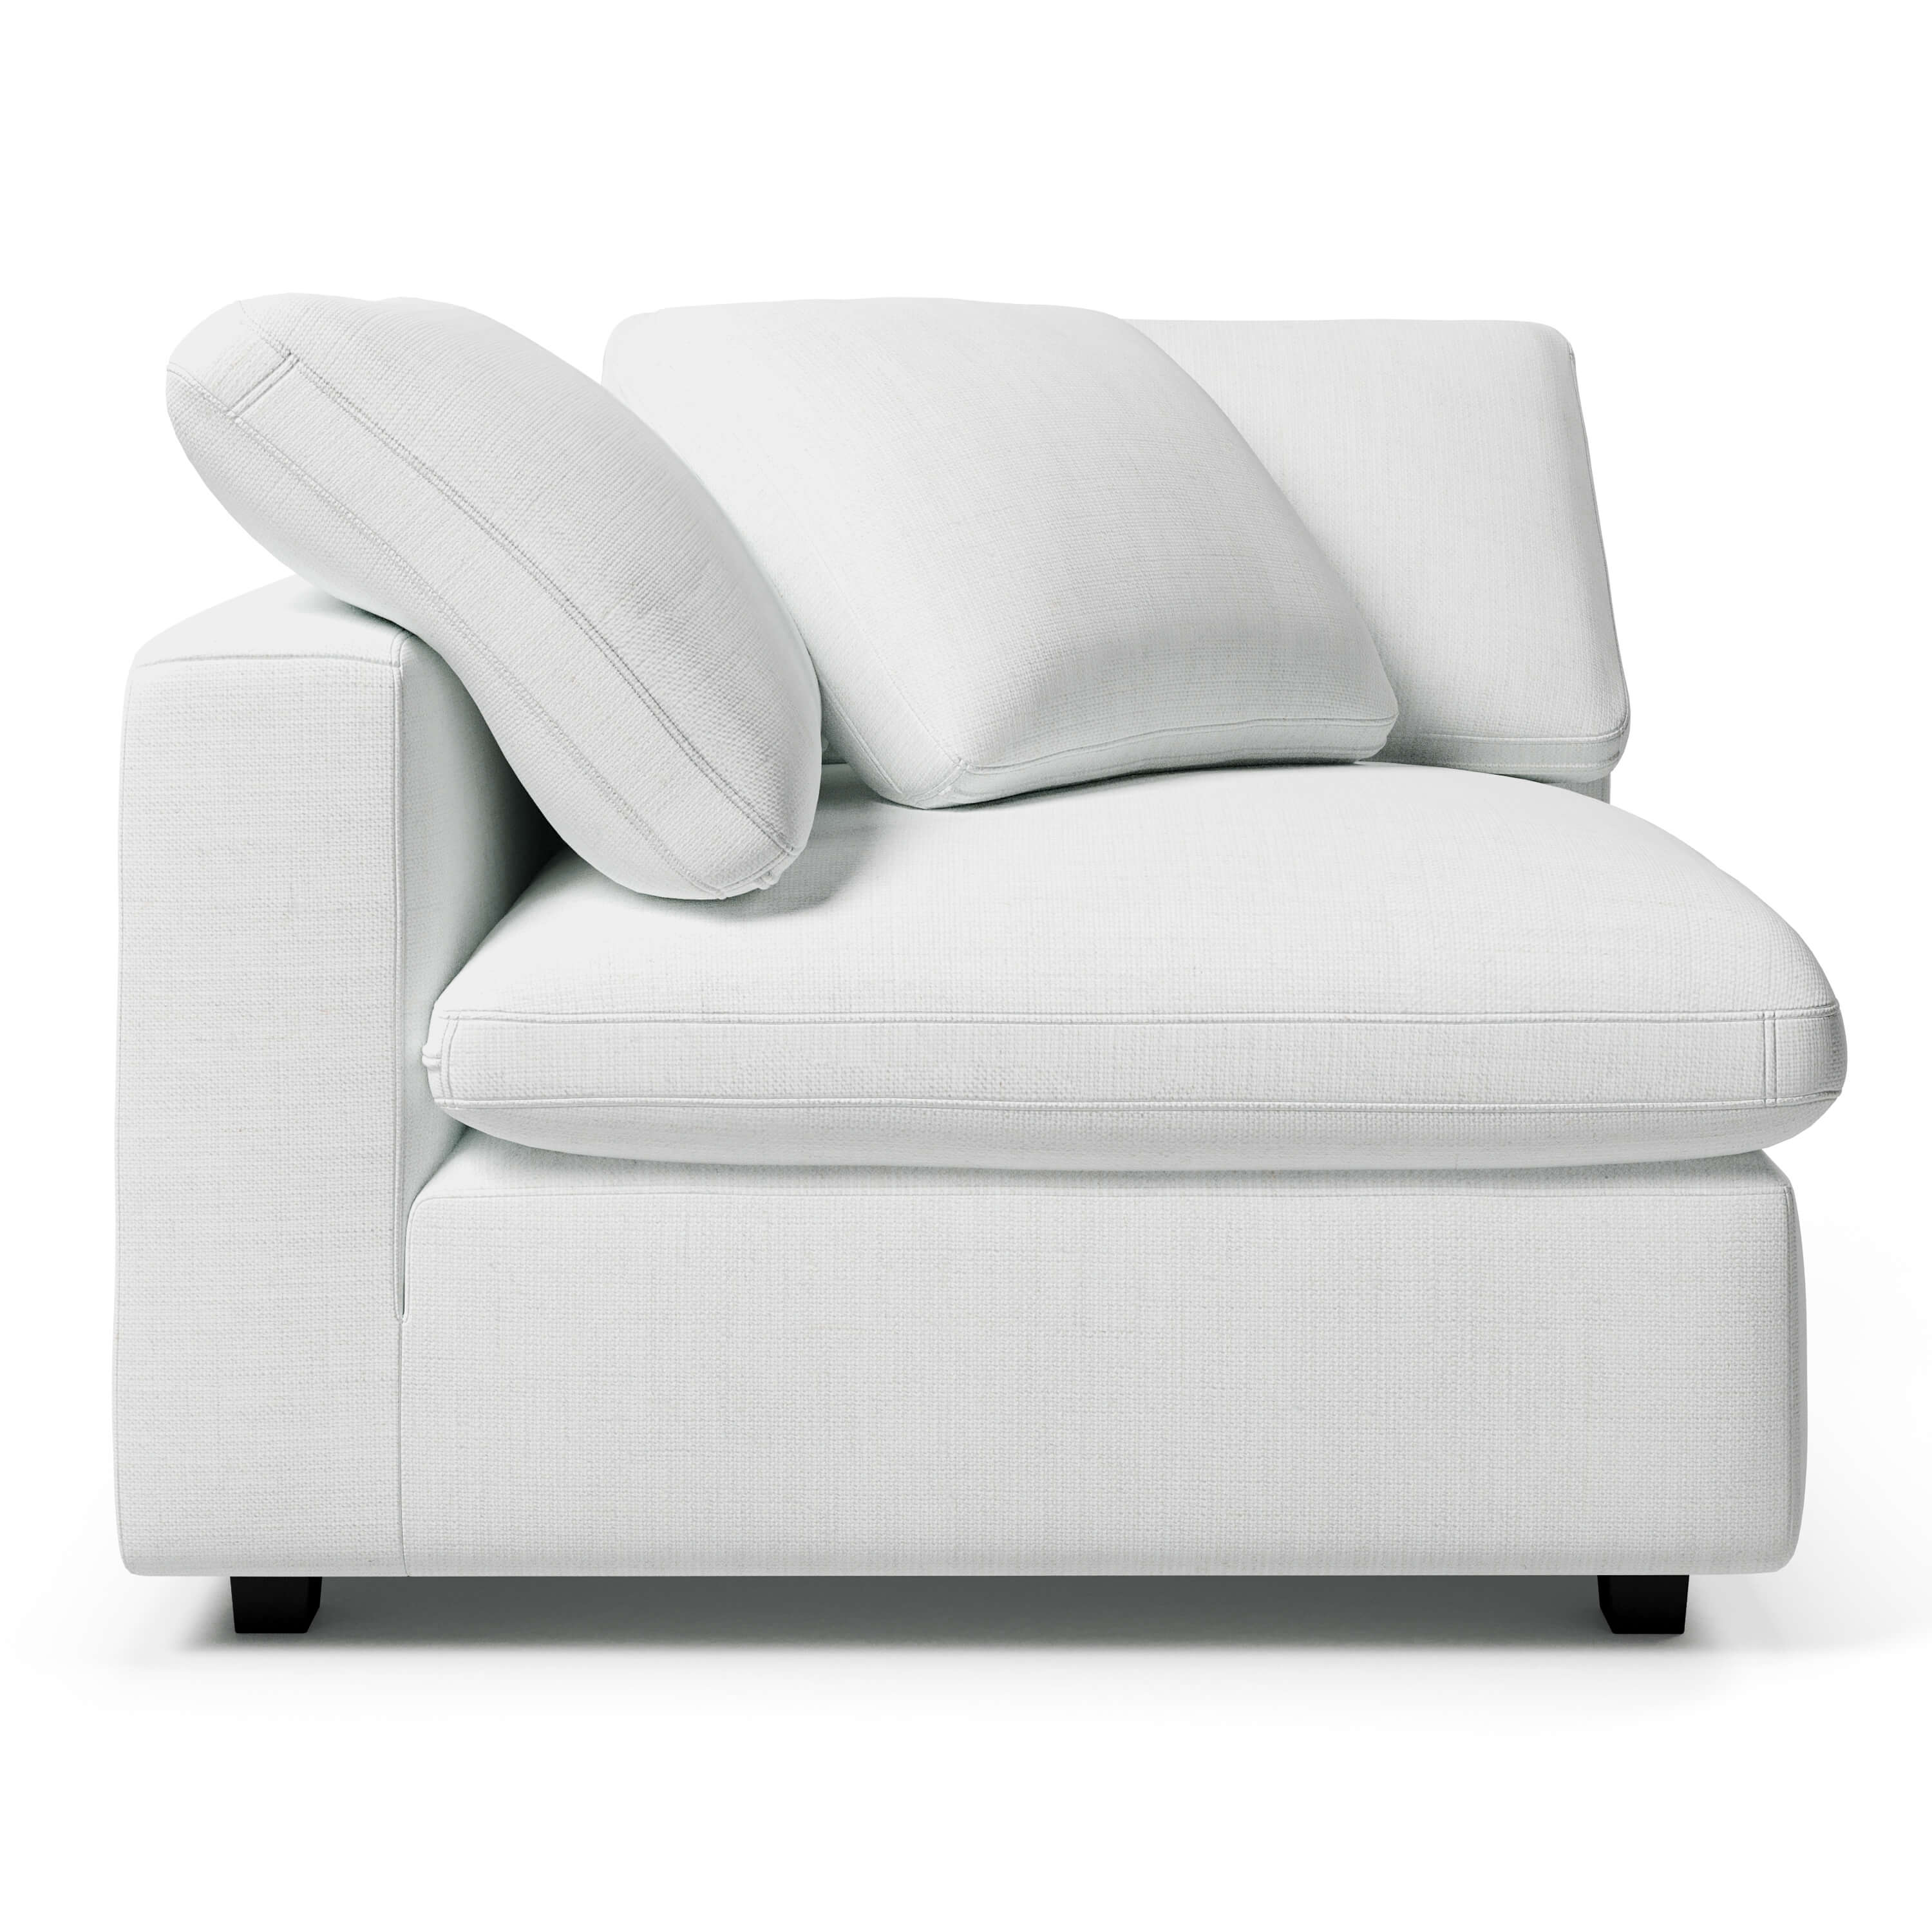 White Comfy Corner Chair | Comfy Corner Chair | Couch Haus